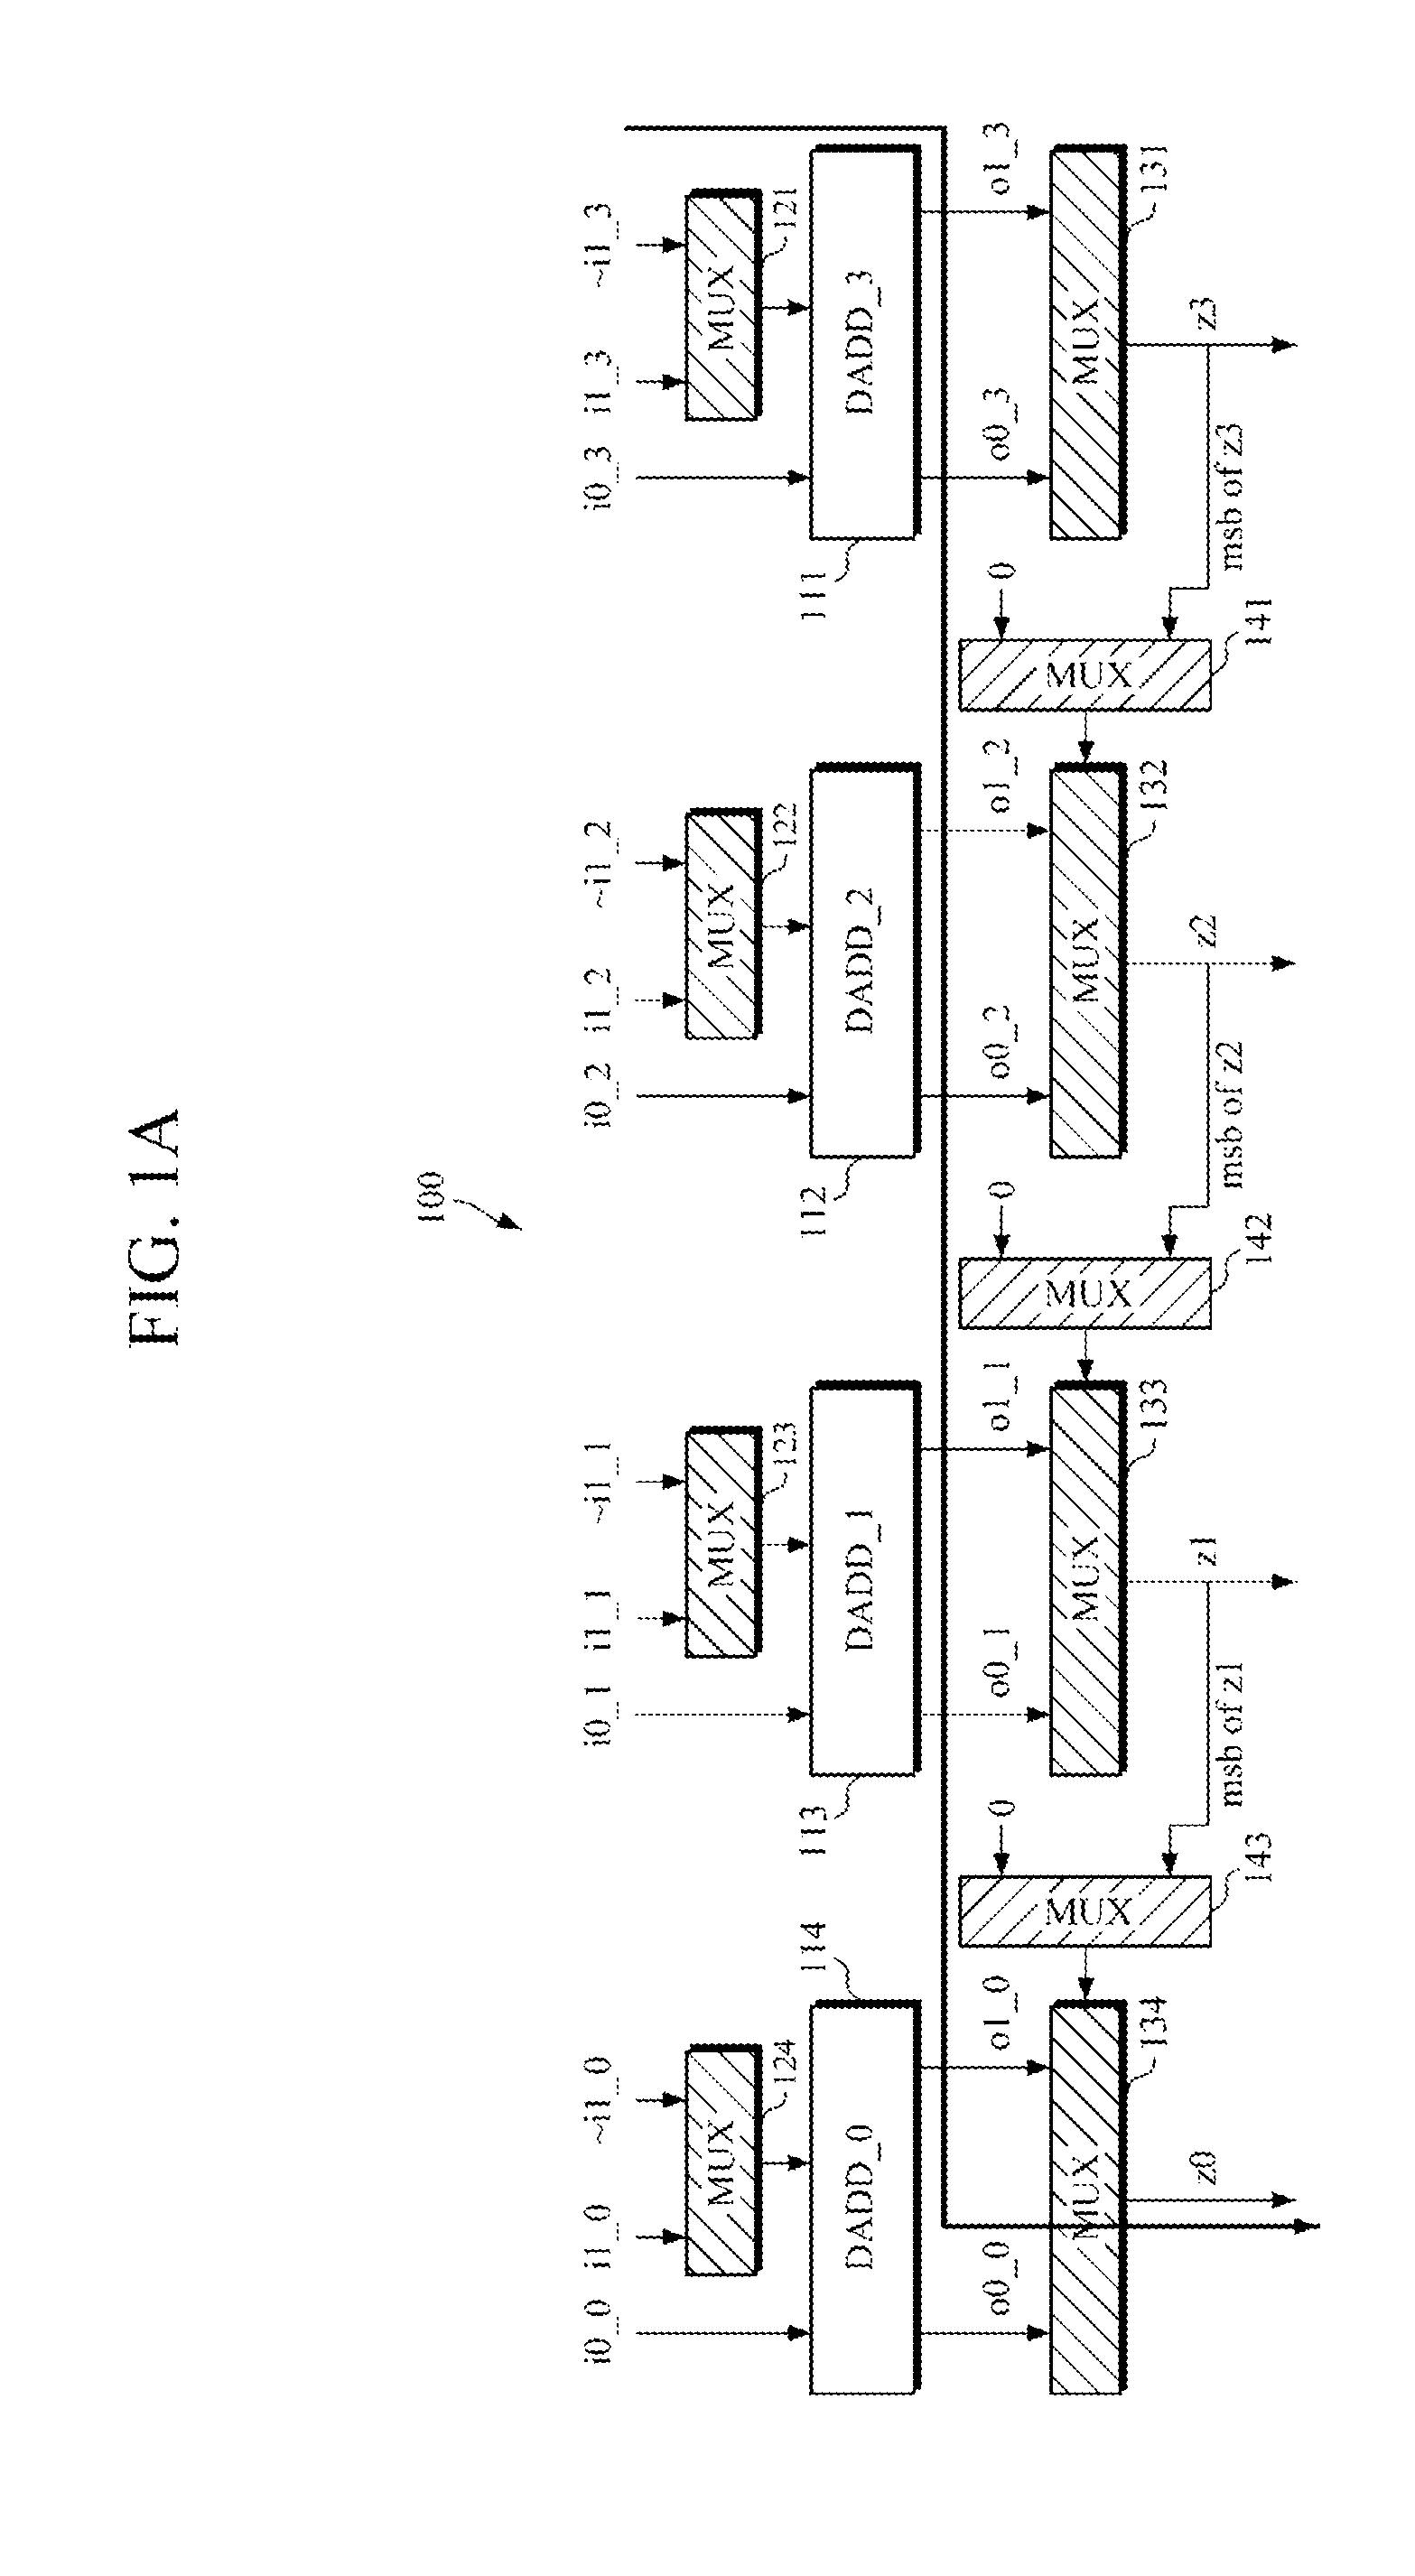 Adder capable of supporting addition and subtraction of up to n-bit data and method of supporting addition and subtraction of a plurality of data type using the adder